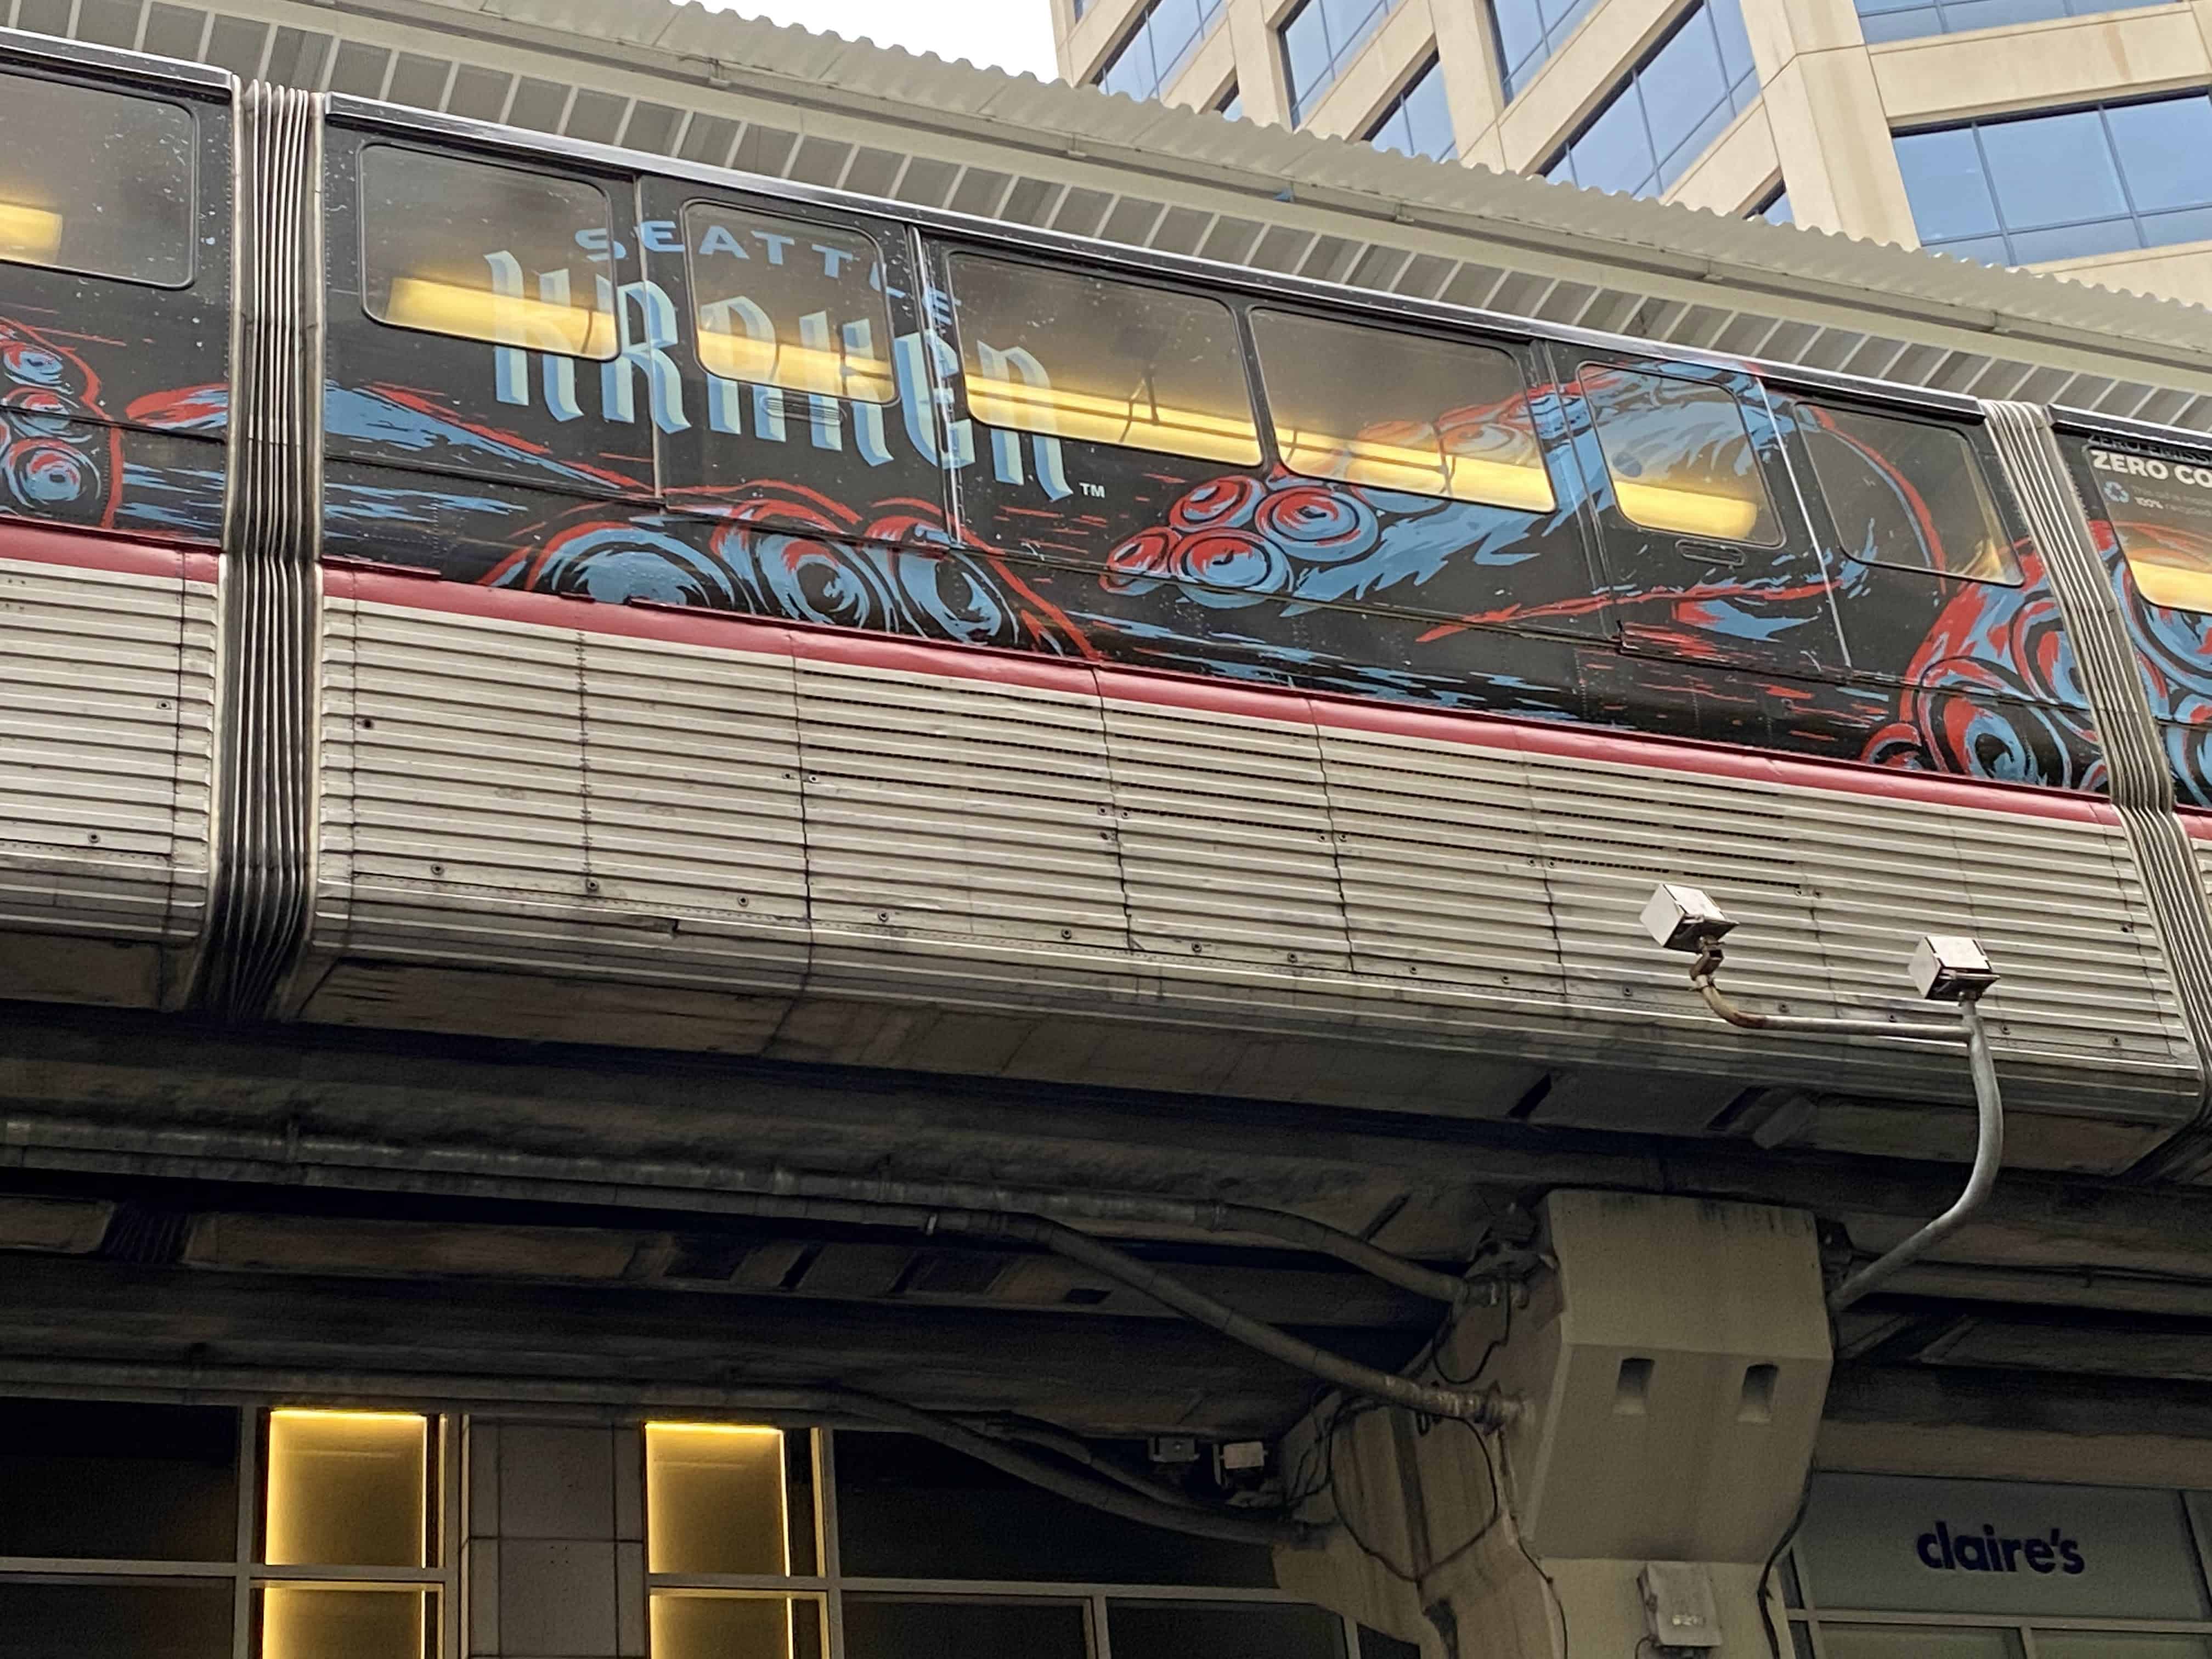 The Monorail - Seattle - Top Things to do in Seattle WA 2022